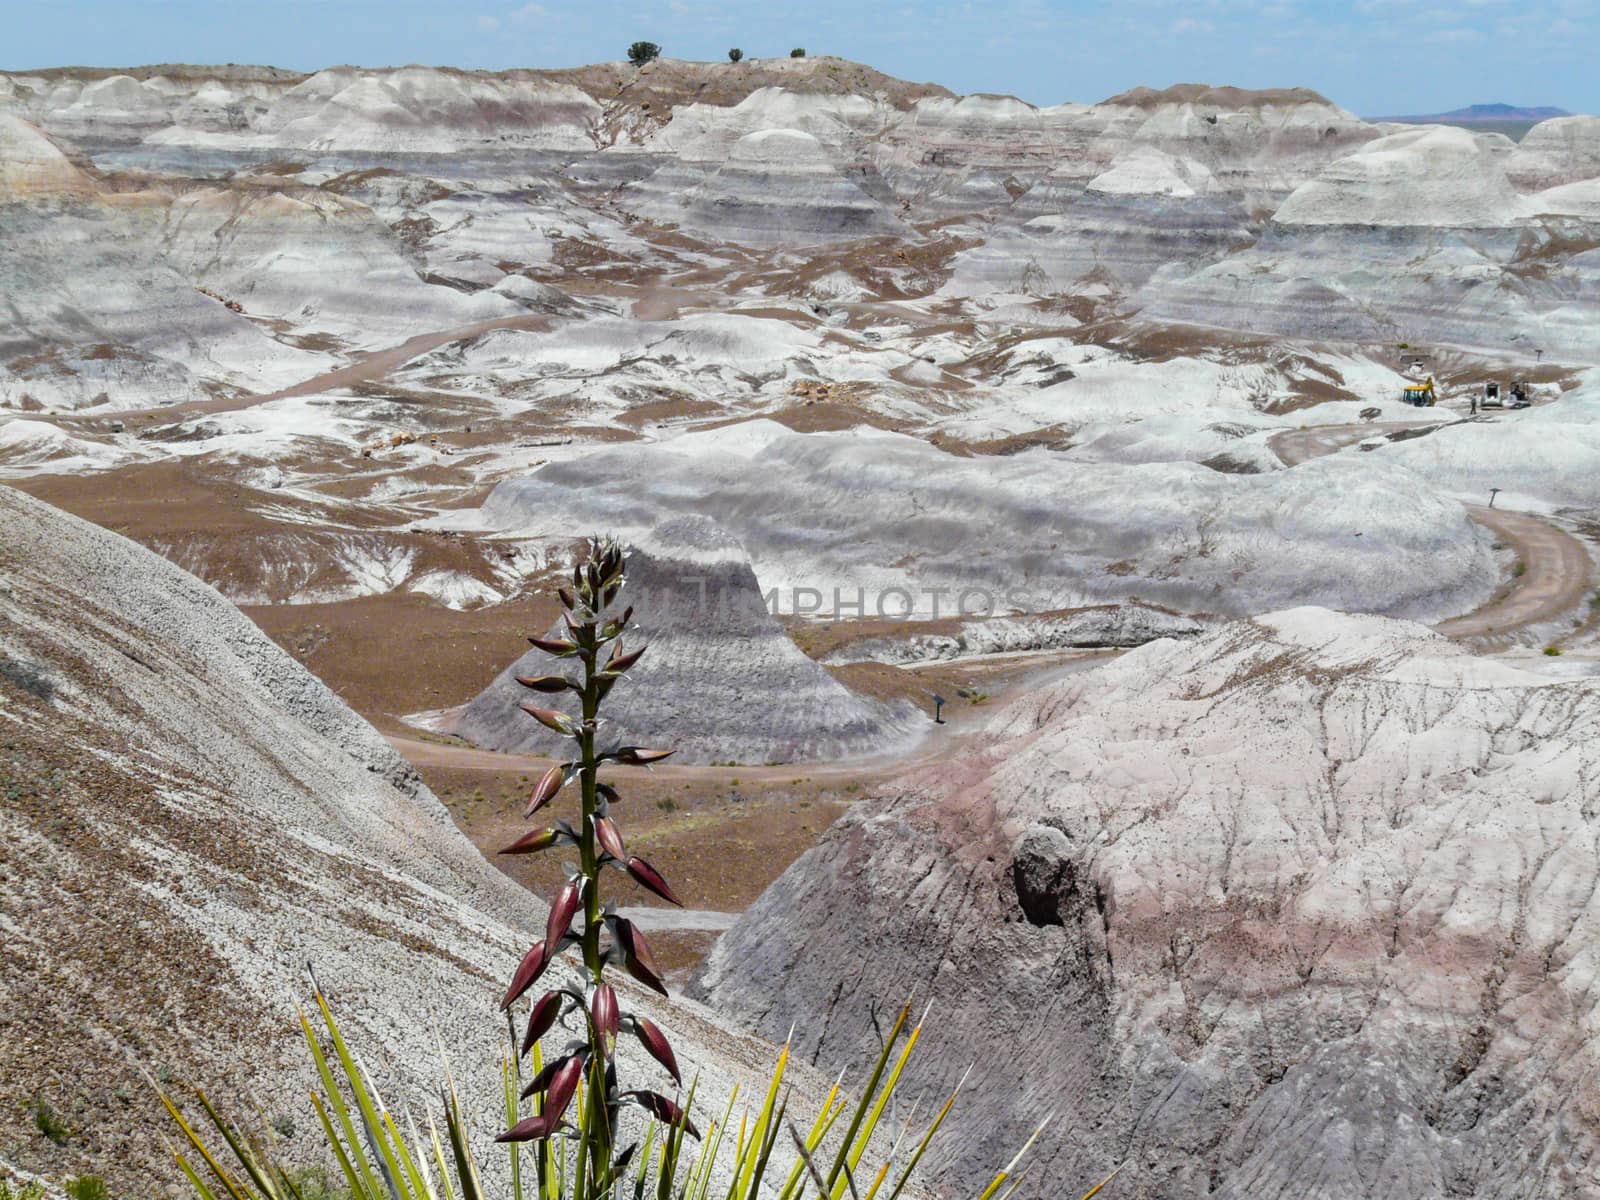 View at Painted Desert with yucca